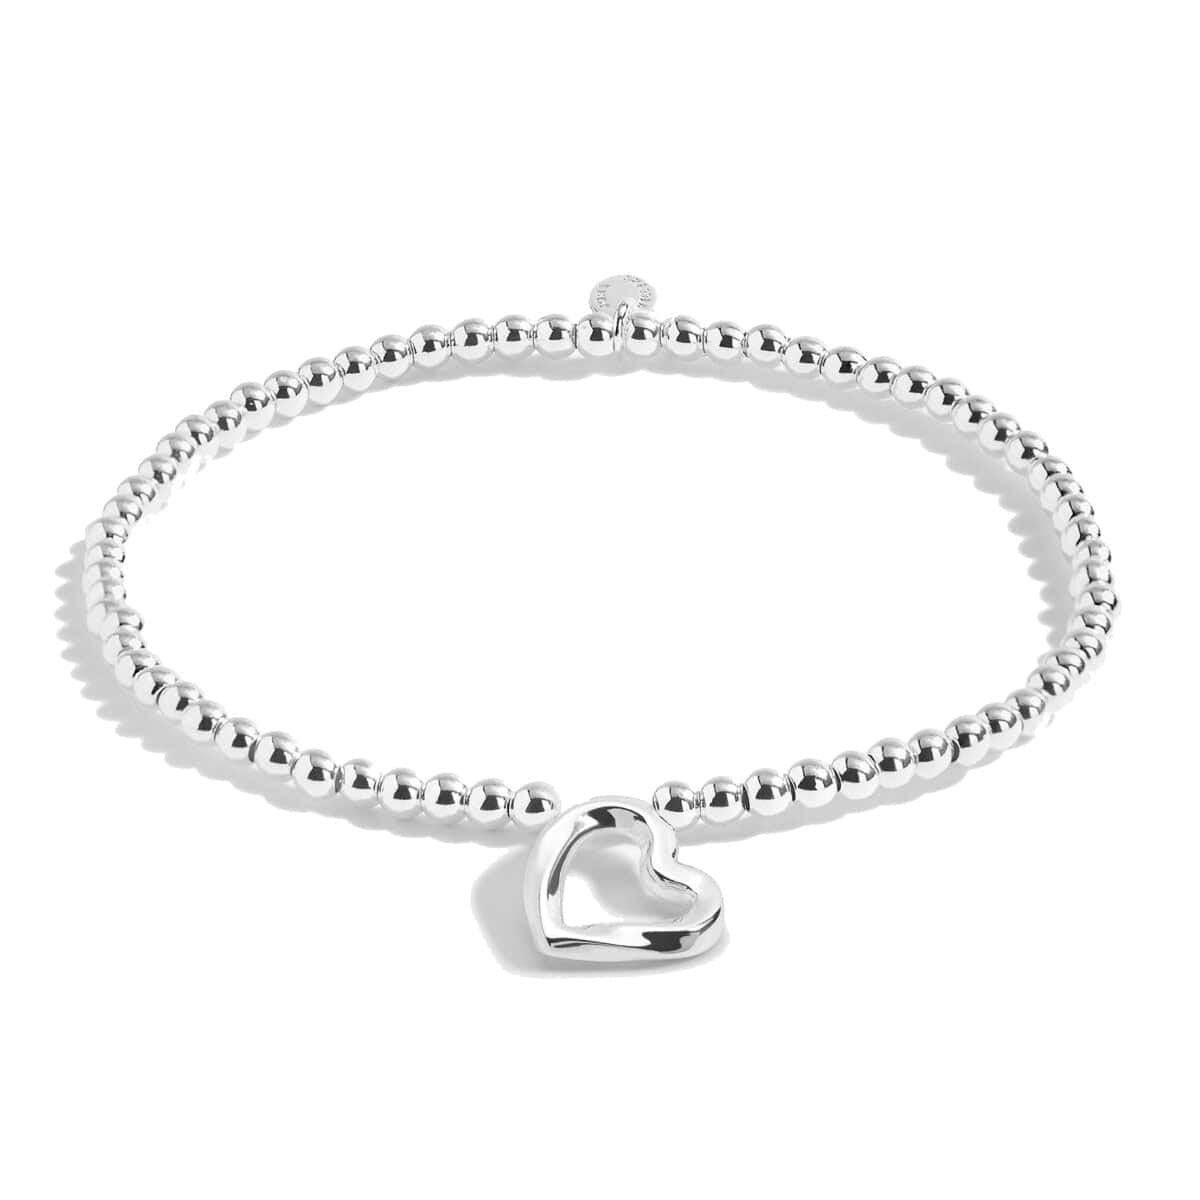 Joma Jewellery Bracelet Joma Jewellery Bracelet - A Little From The Heart